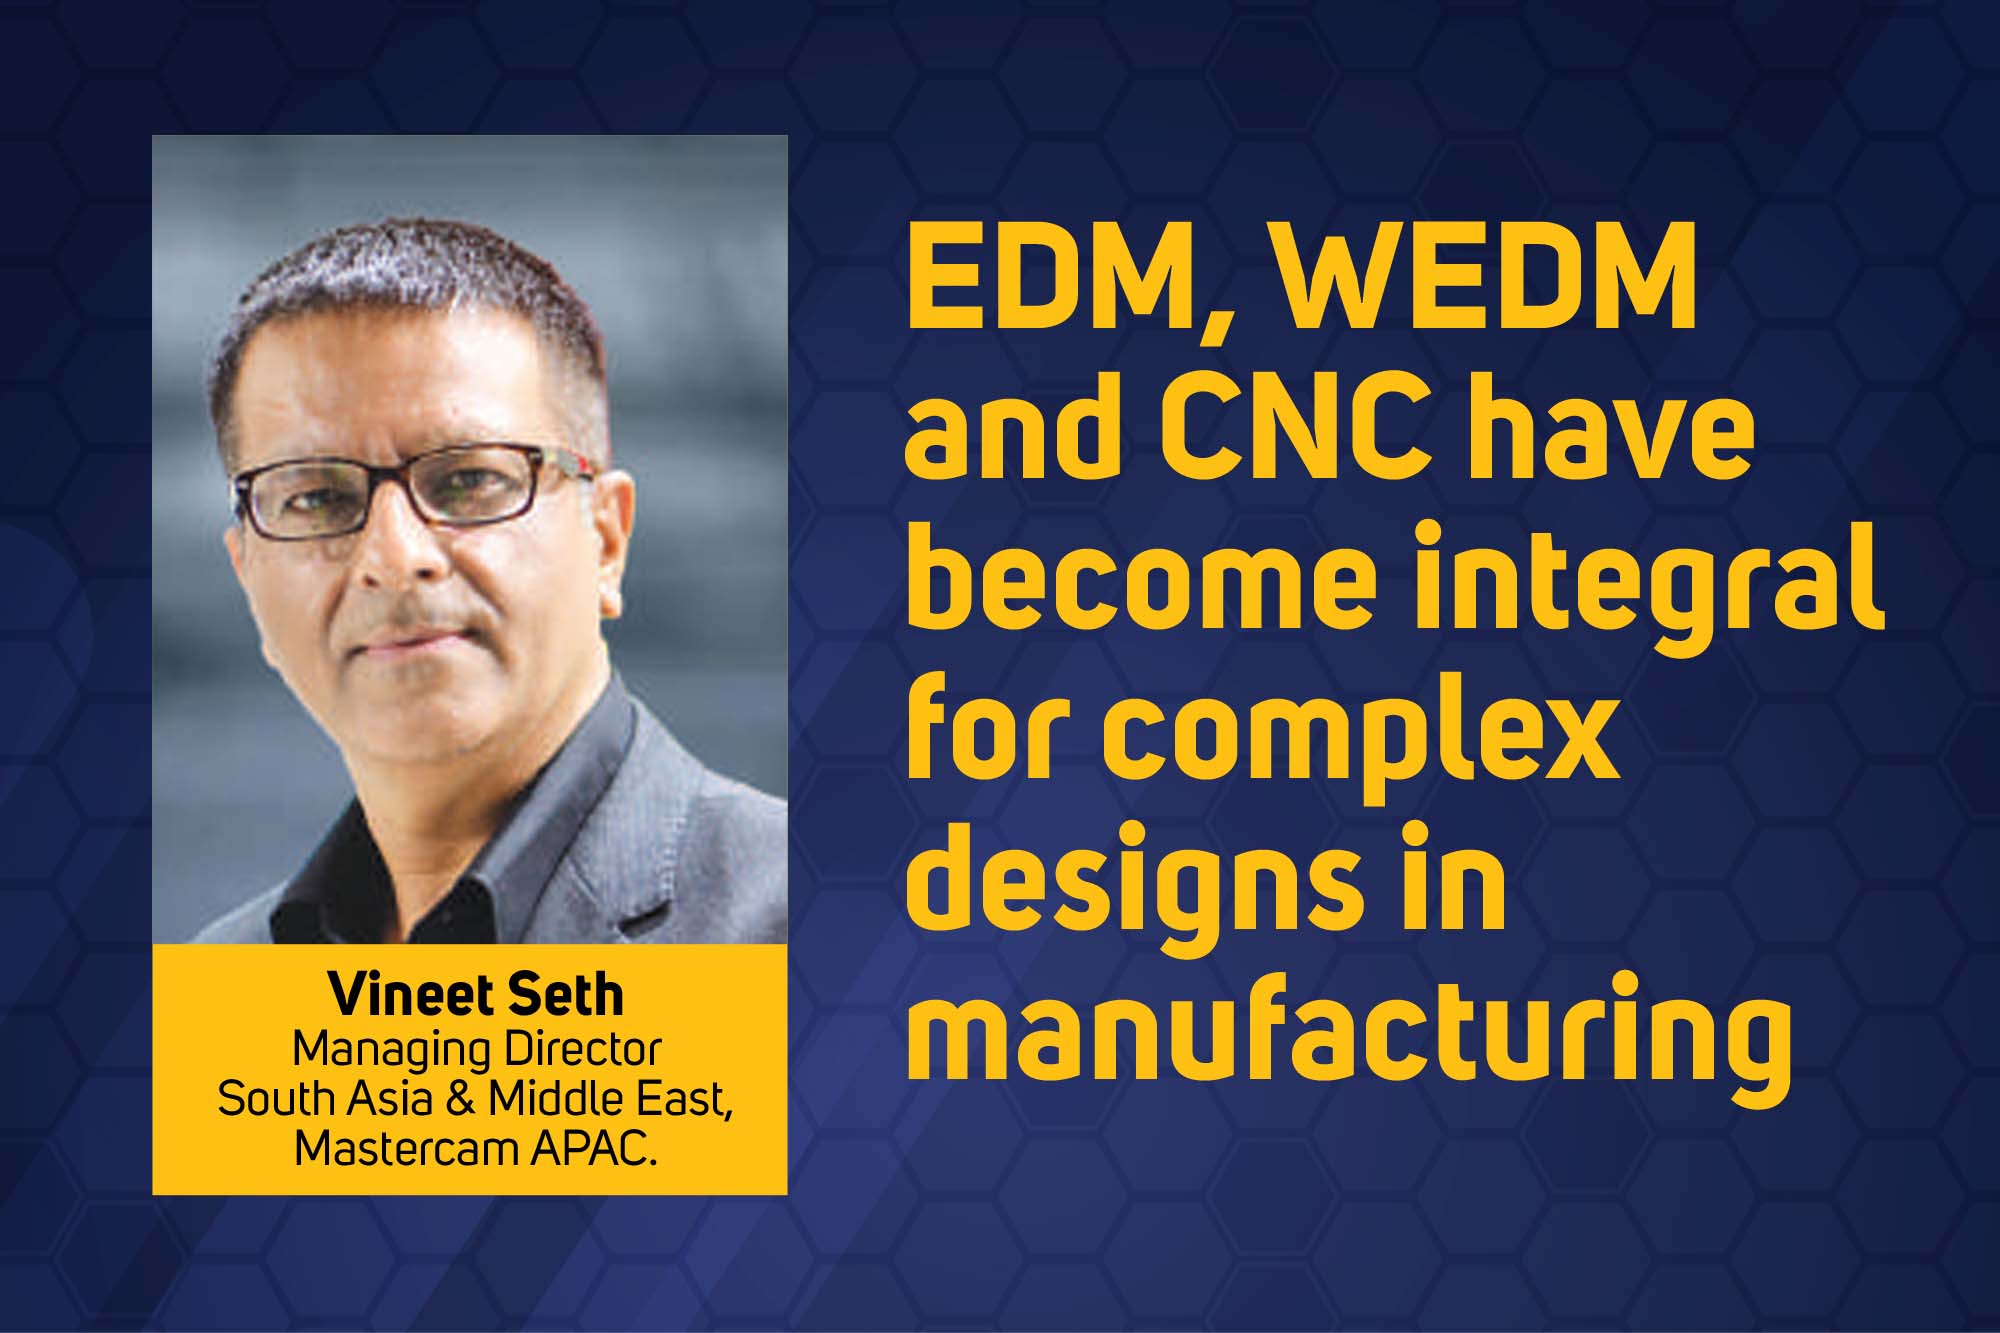 EDM, WEDM and CNC have become integral for complex designs in manufacturing